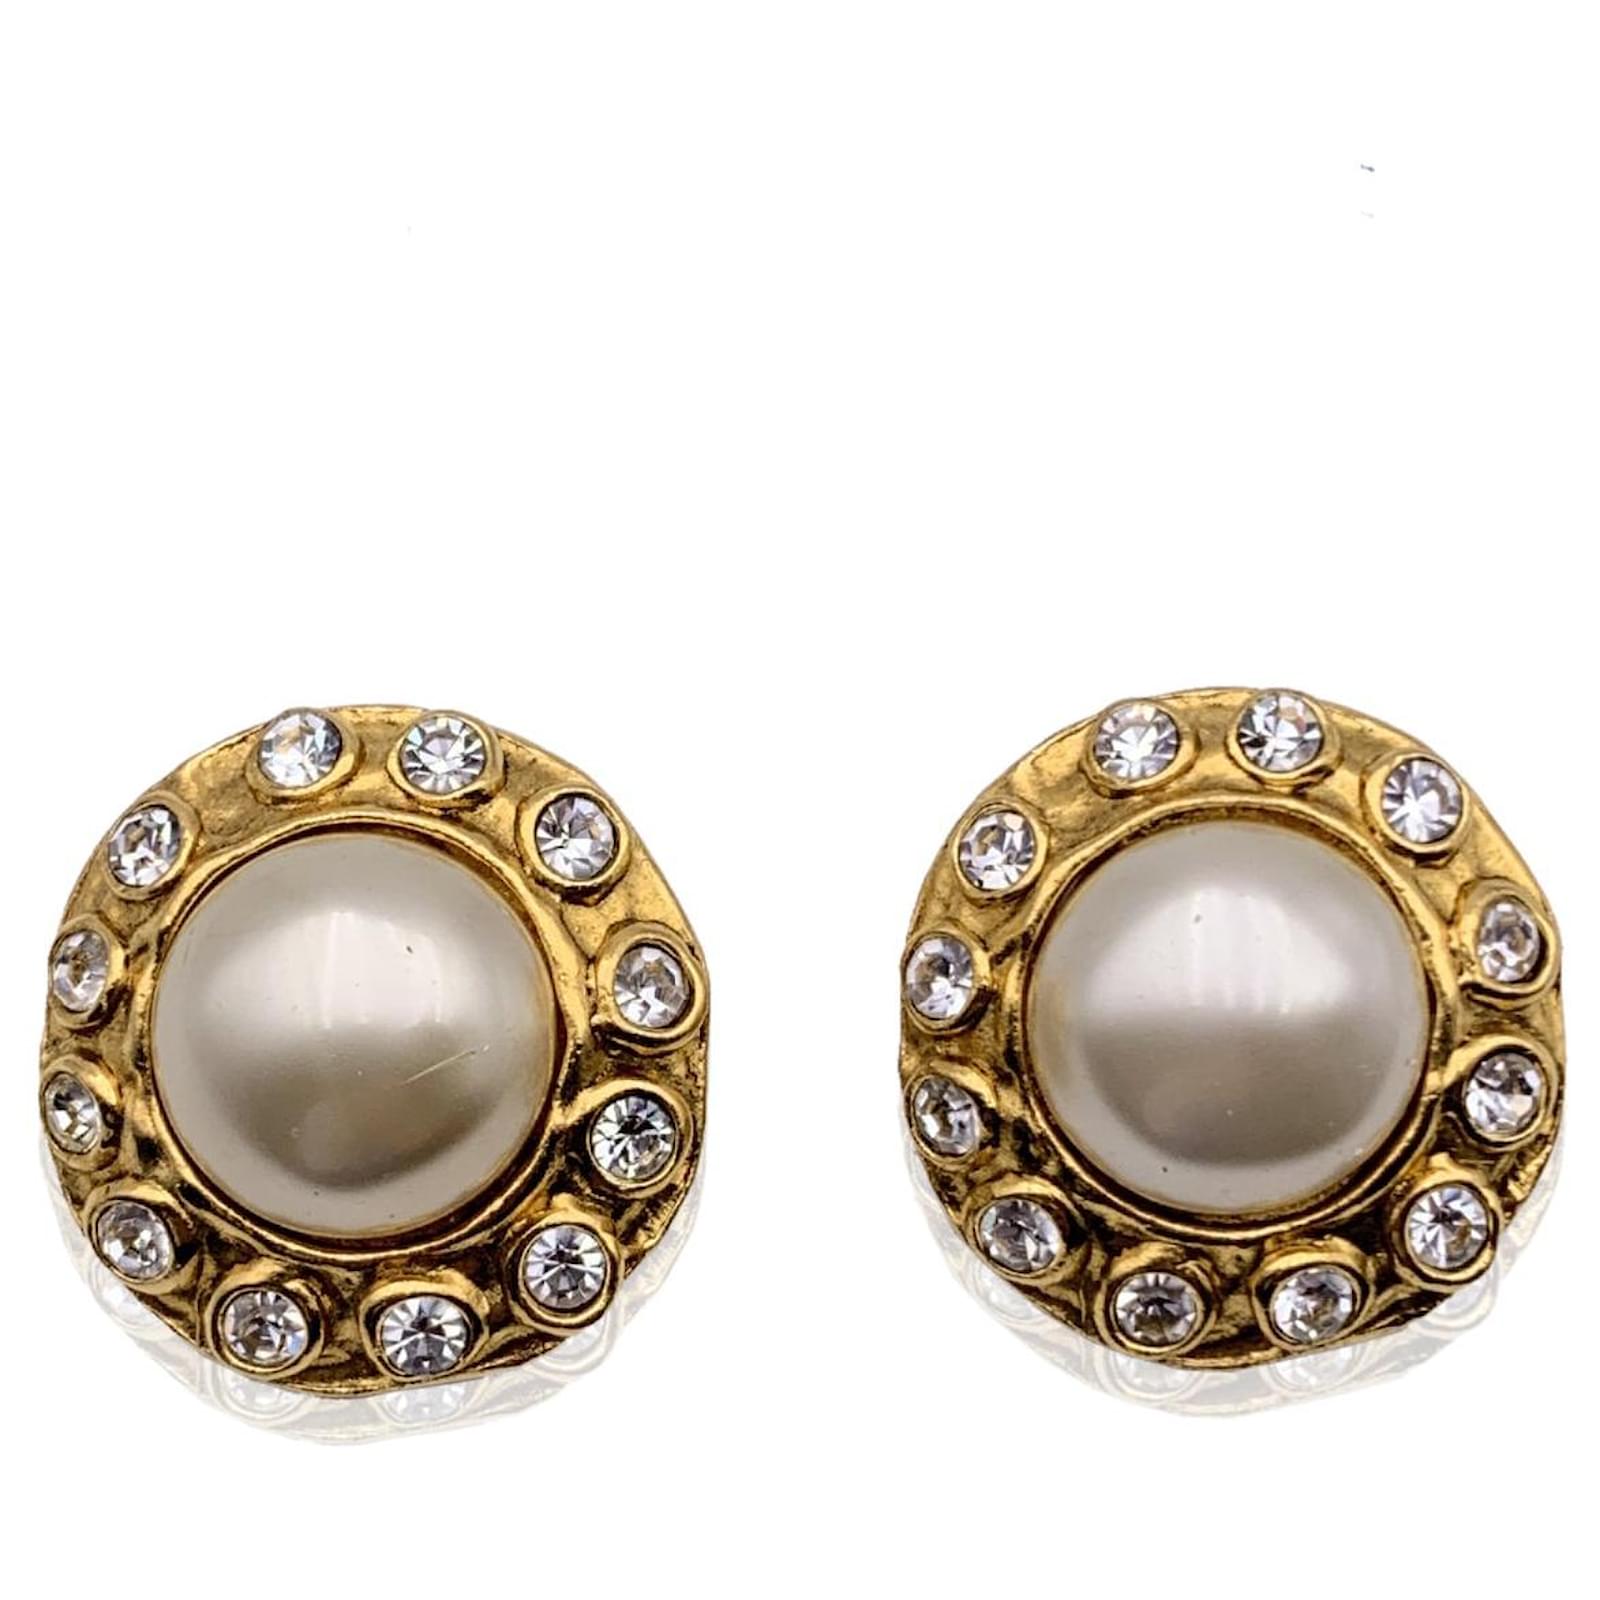 Clip-on earrings - Metal, glass pearls, imitation pearls & strass, gold,  pearly white & crystal — Fashion